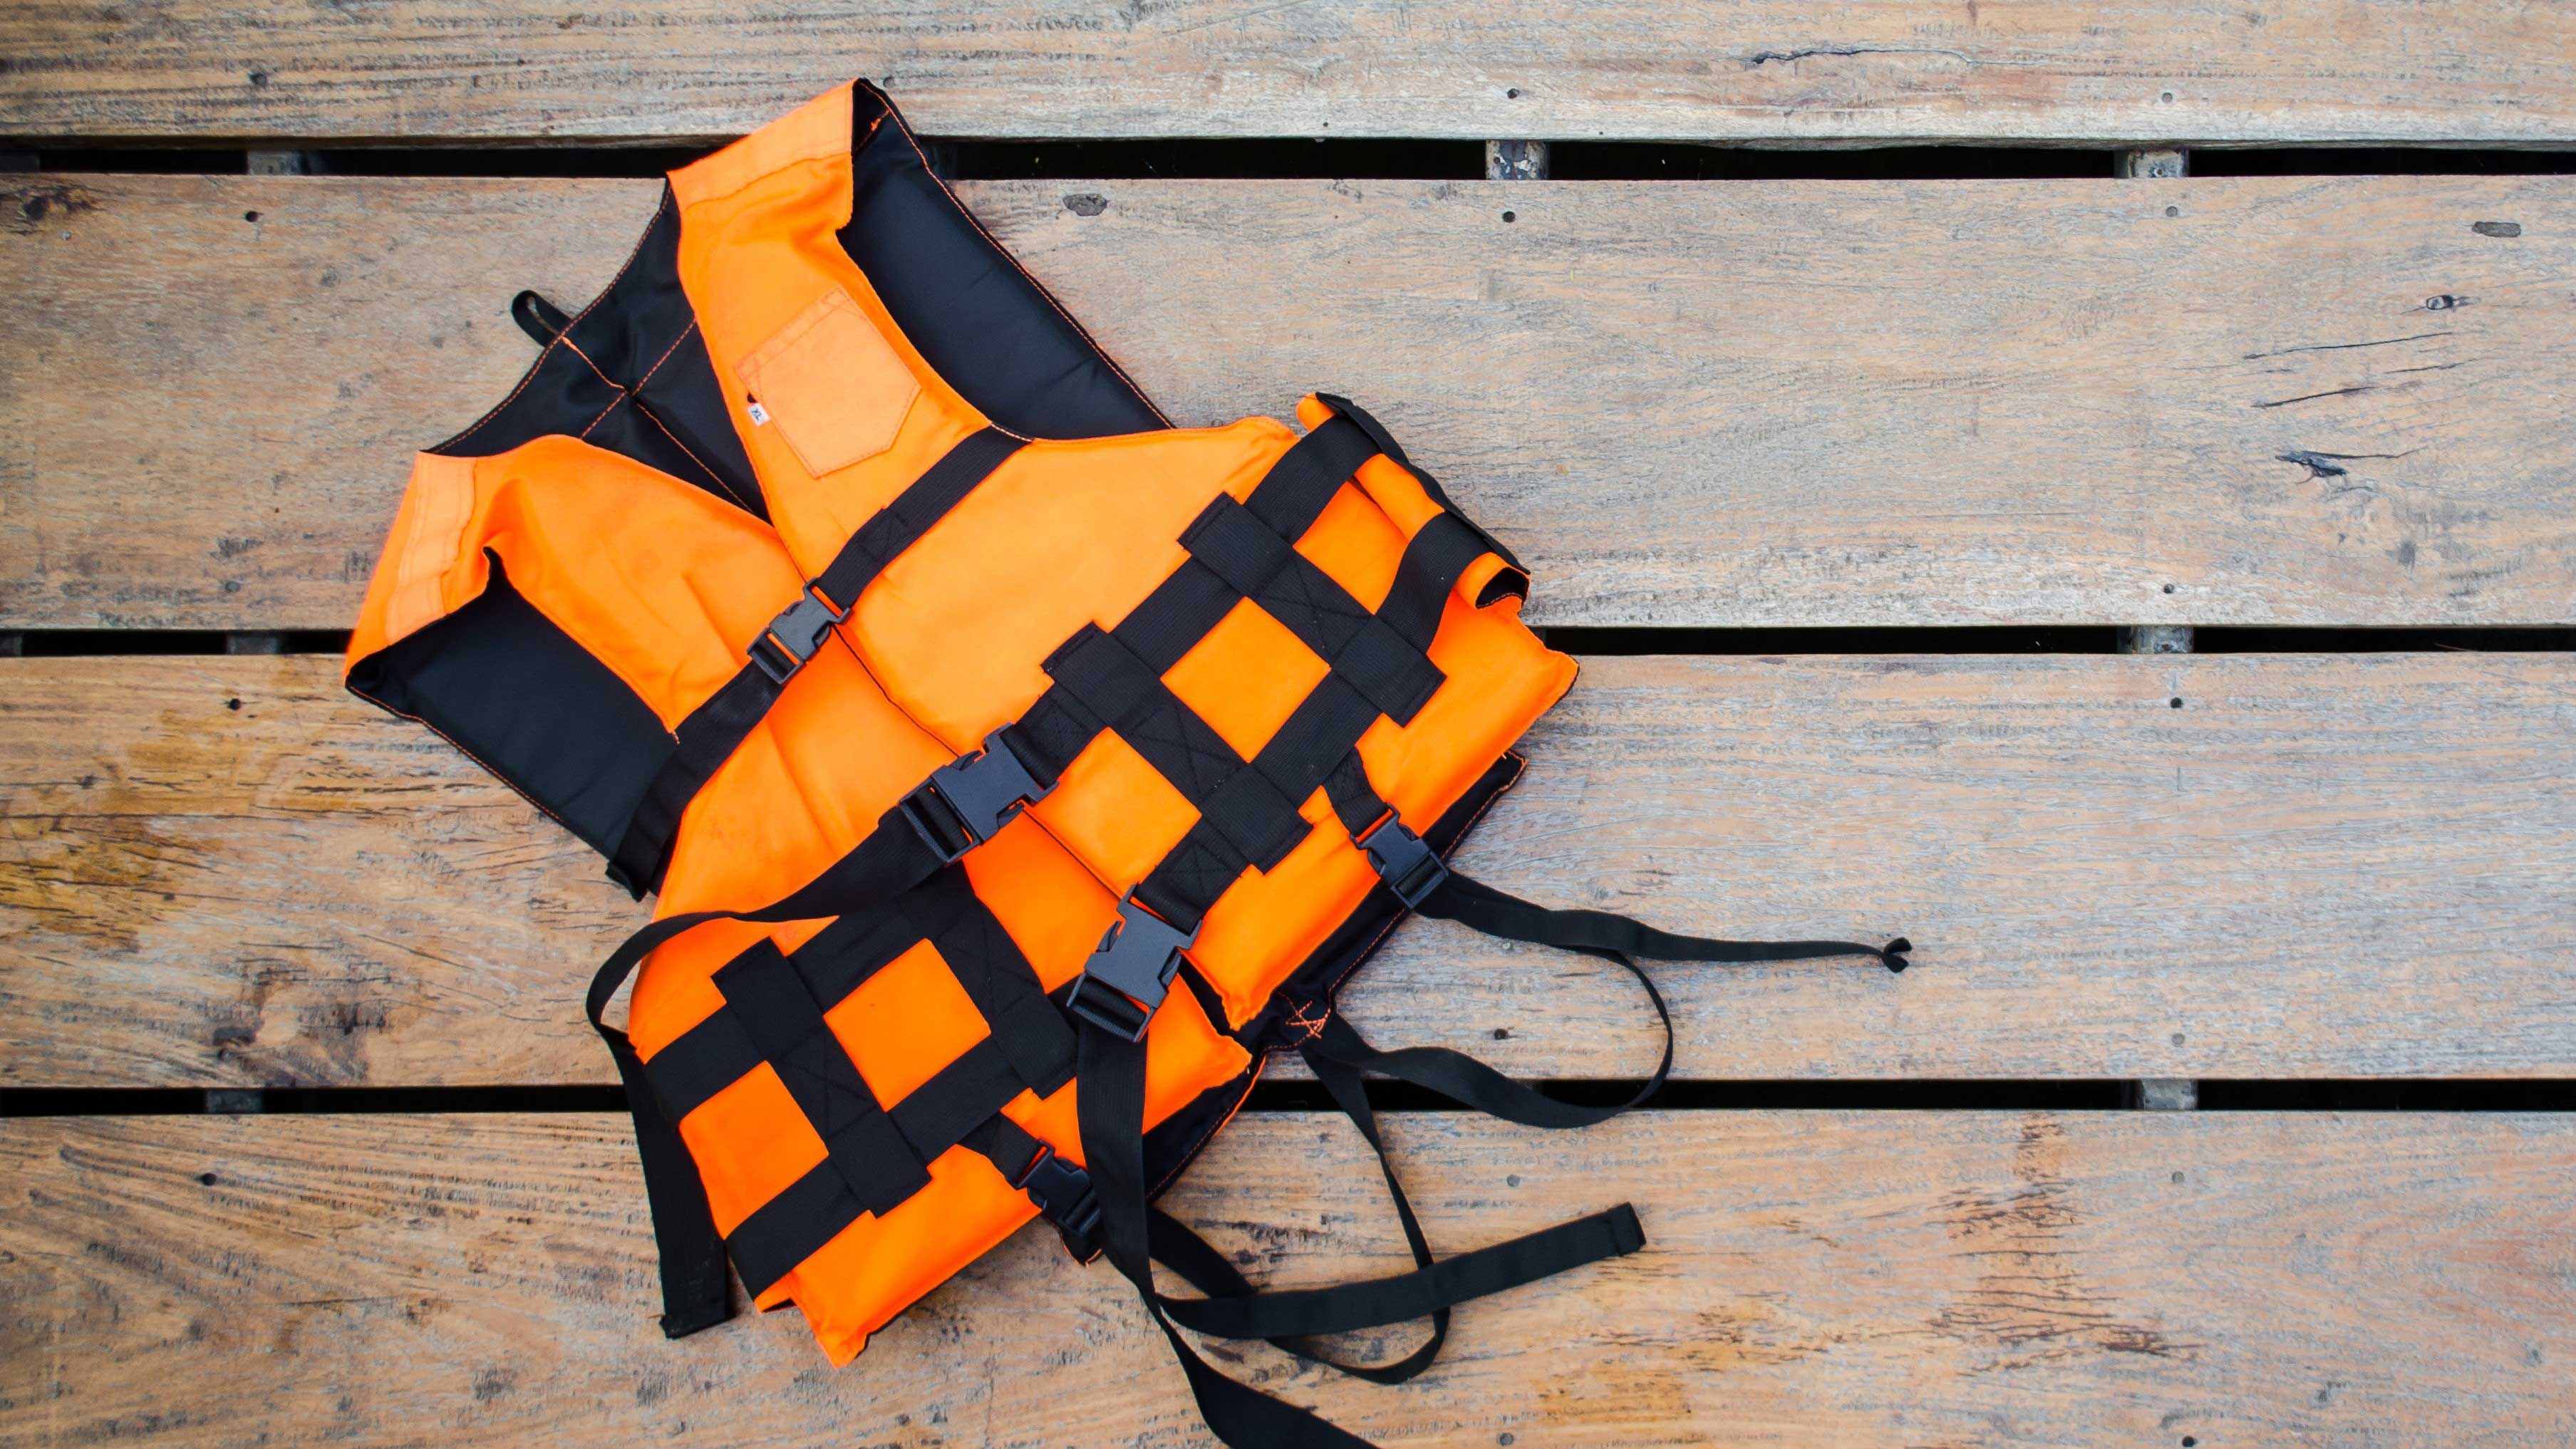 A life jacket laying on a wooden surface.